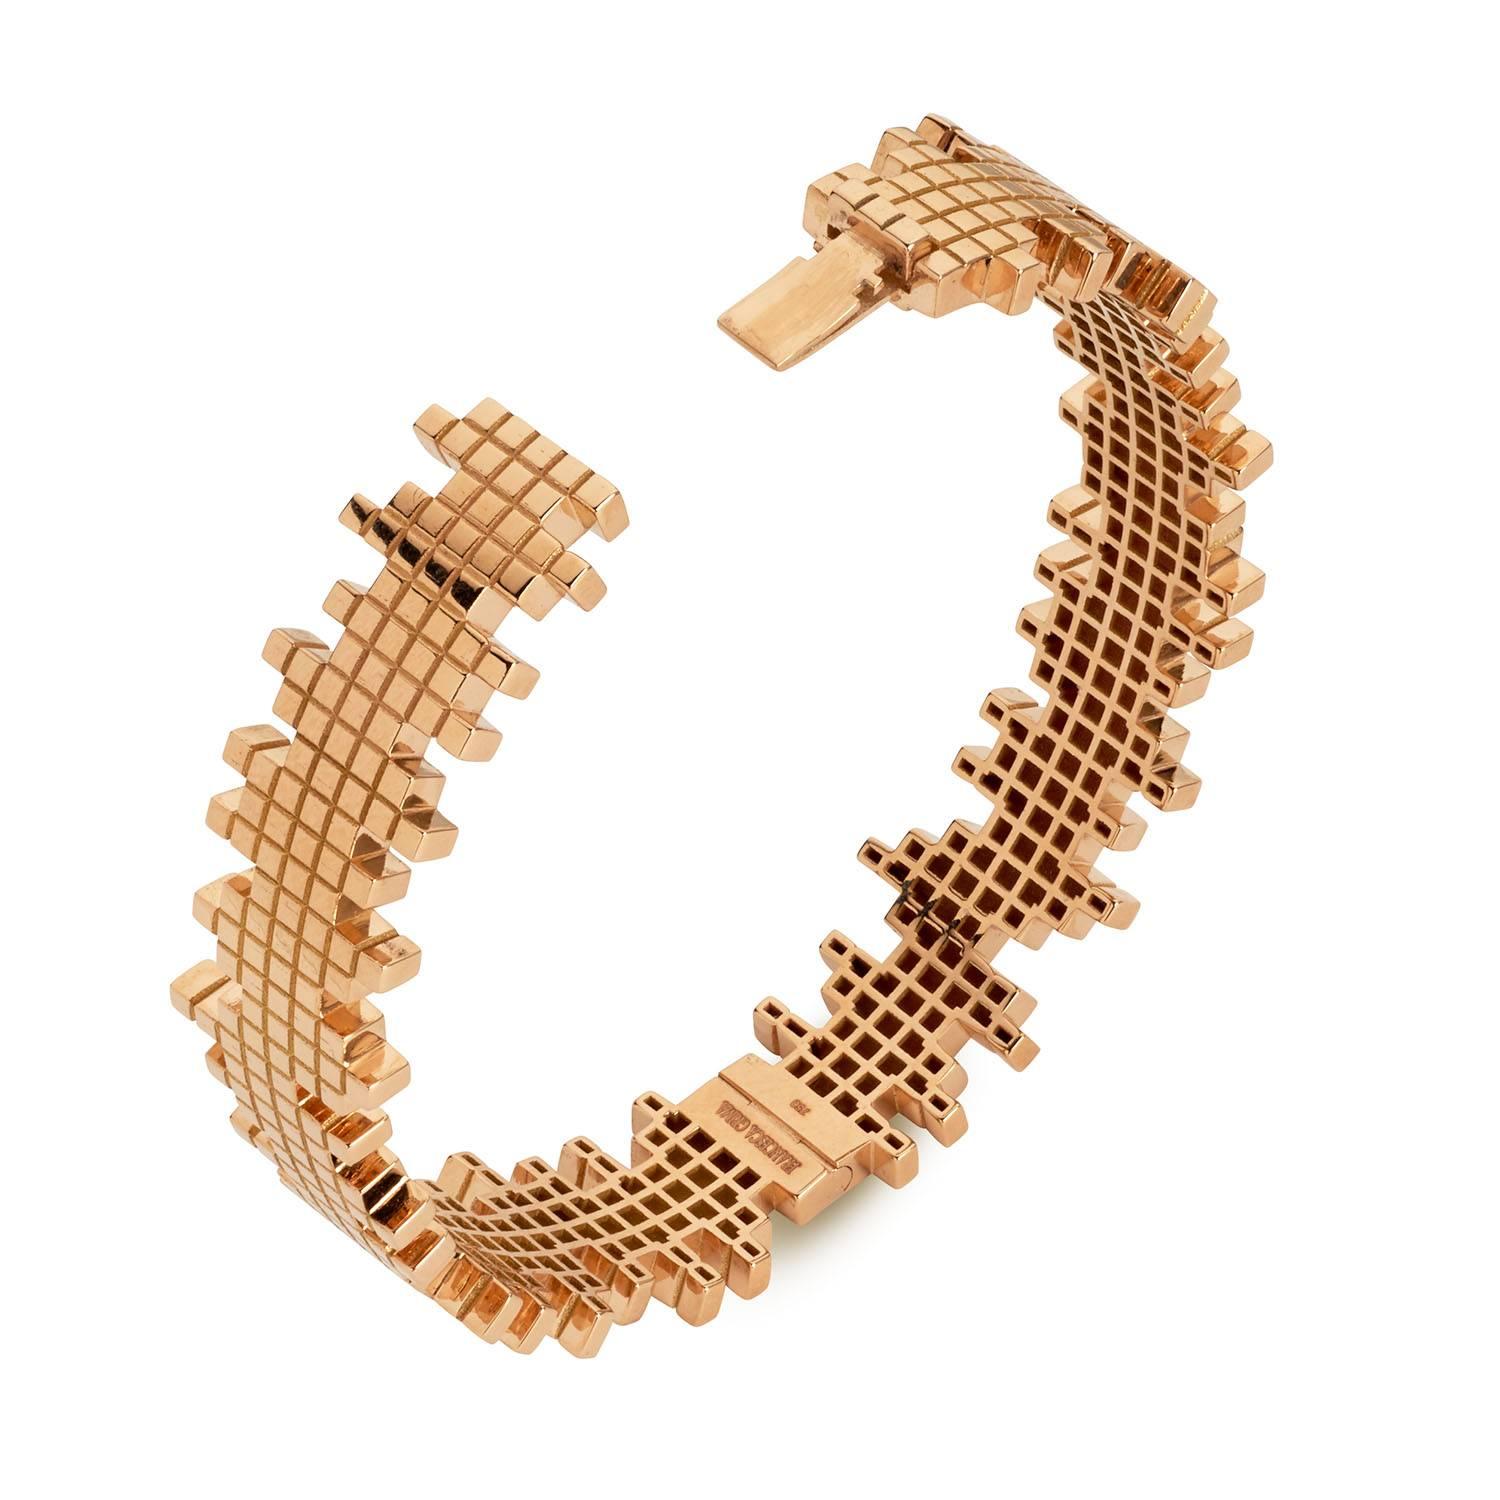 Rose gold pixel bangle by Francesca Grima

・Polished 18ct. Rose Gold
・Diameter: 5.9cm x 5cm
・Width: 1.9cm
・Push fastening, hinged

Signed Francesca Grima, 750

About Francesca Grima 
Born into a family that has a long tradition in fine jewellery –